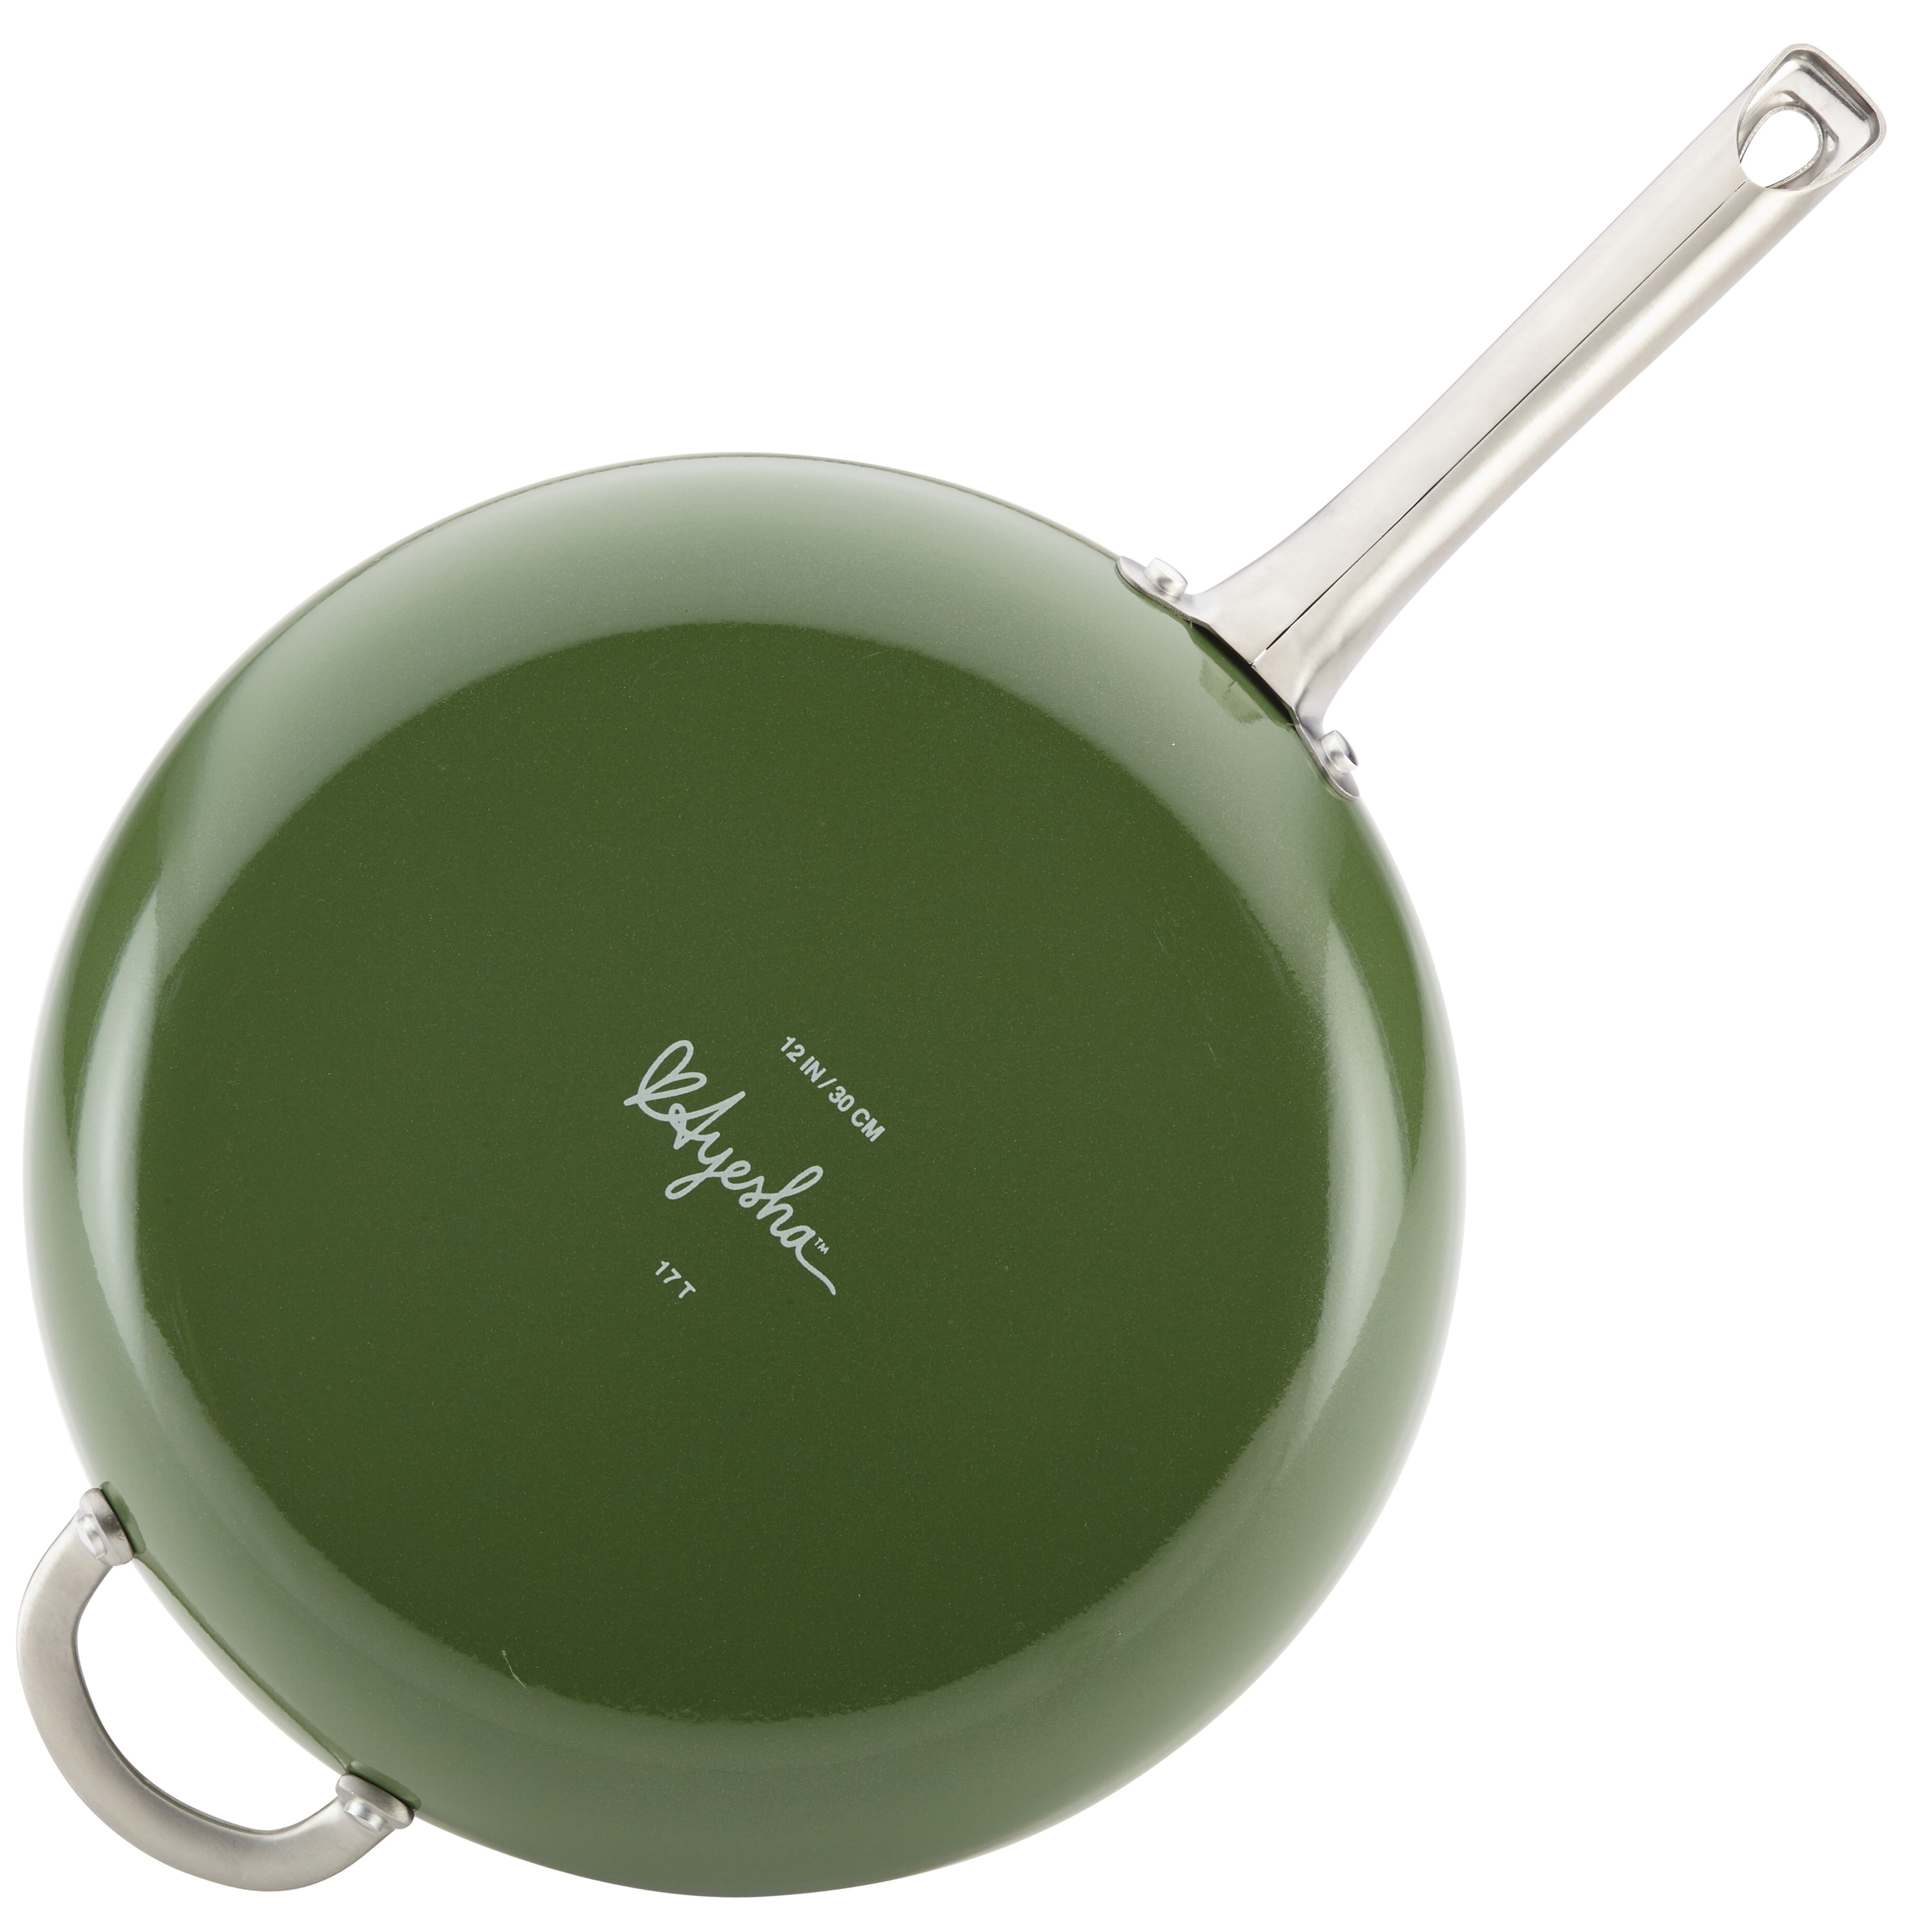 Ayesha Curry Home Collection Porcelain Enamel Nonstick Frying Pan Set -  Brown, 2 pc - Fry's Food Stores